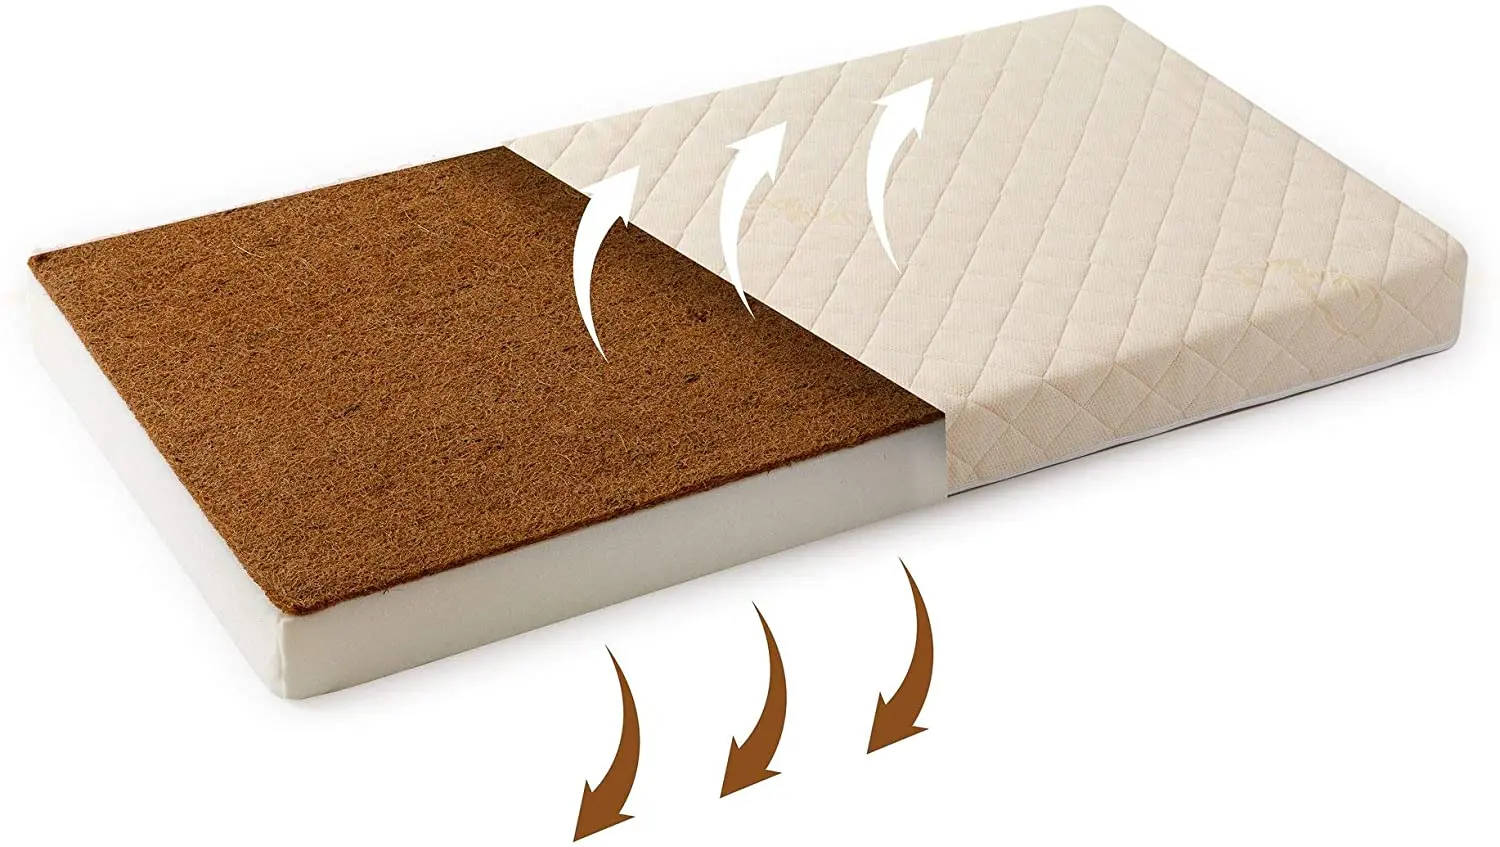 Baby mattress, coconut brown, no chemical odor, hardness for infants, 140x70cm